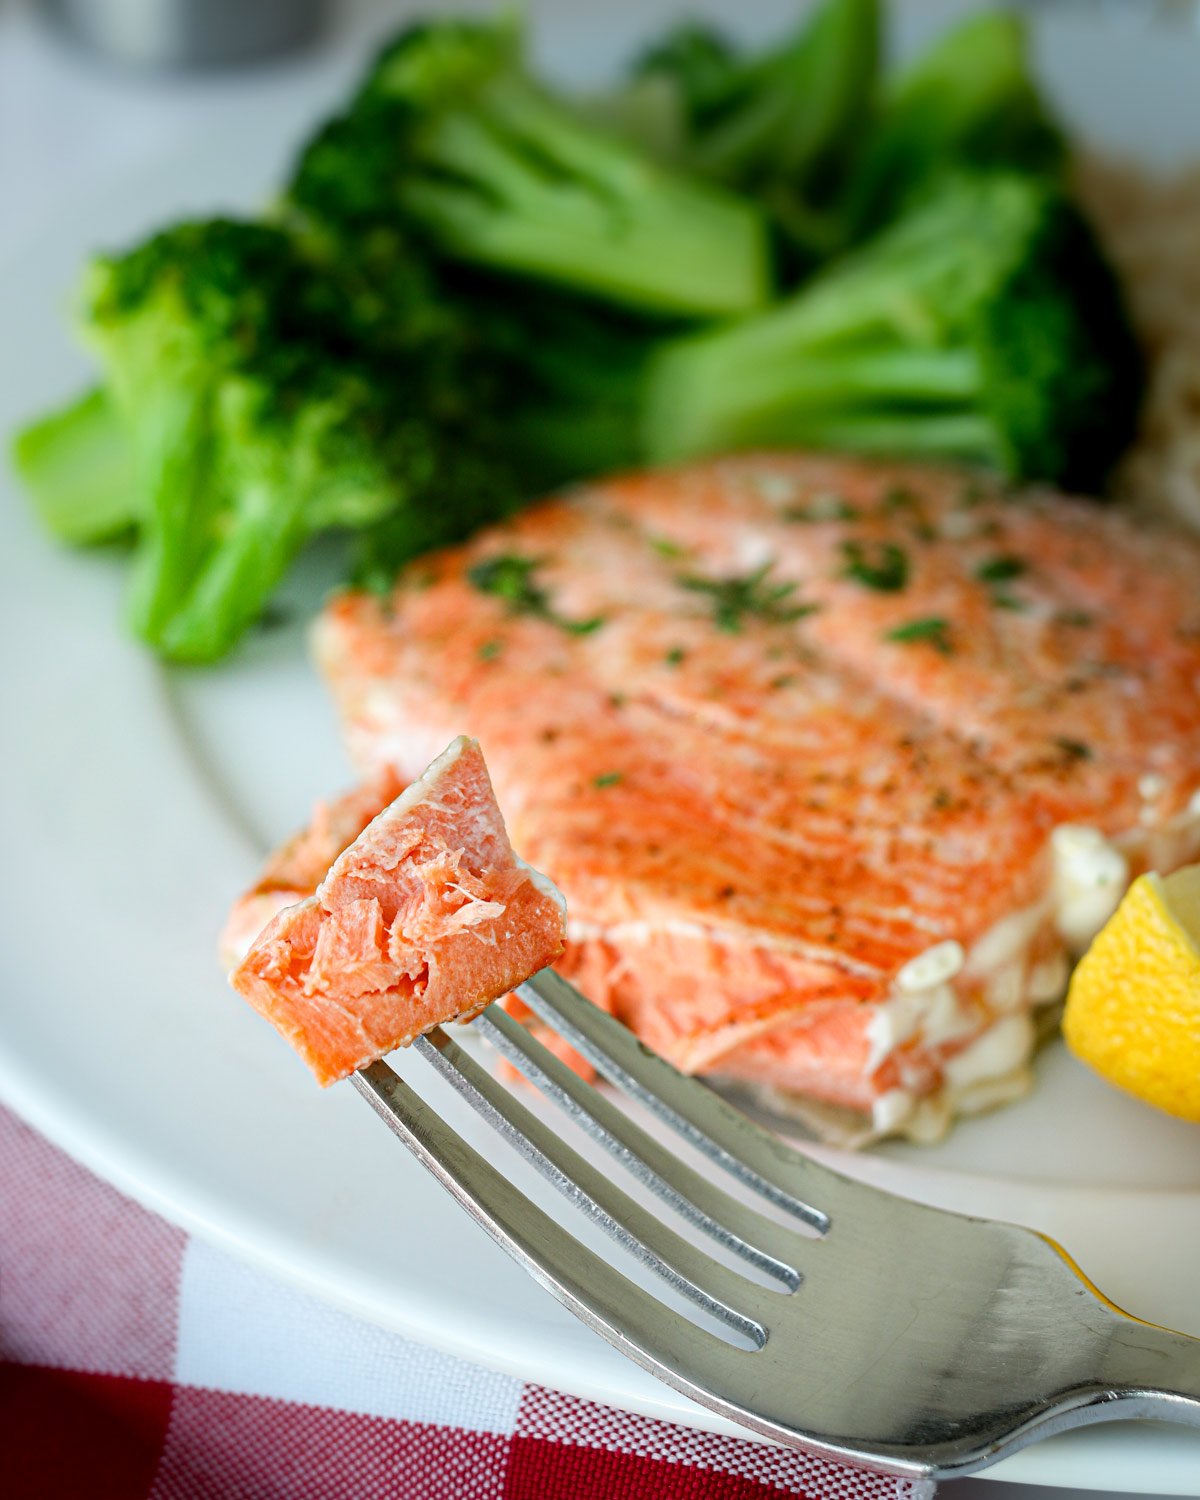 bite of fish on a fork in front of dinner plate with salmon and broccoli.